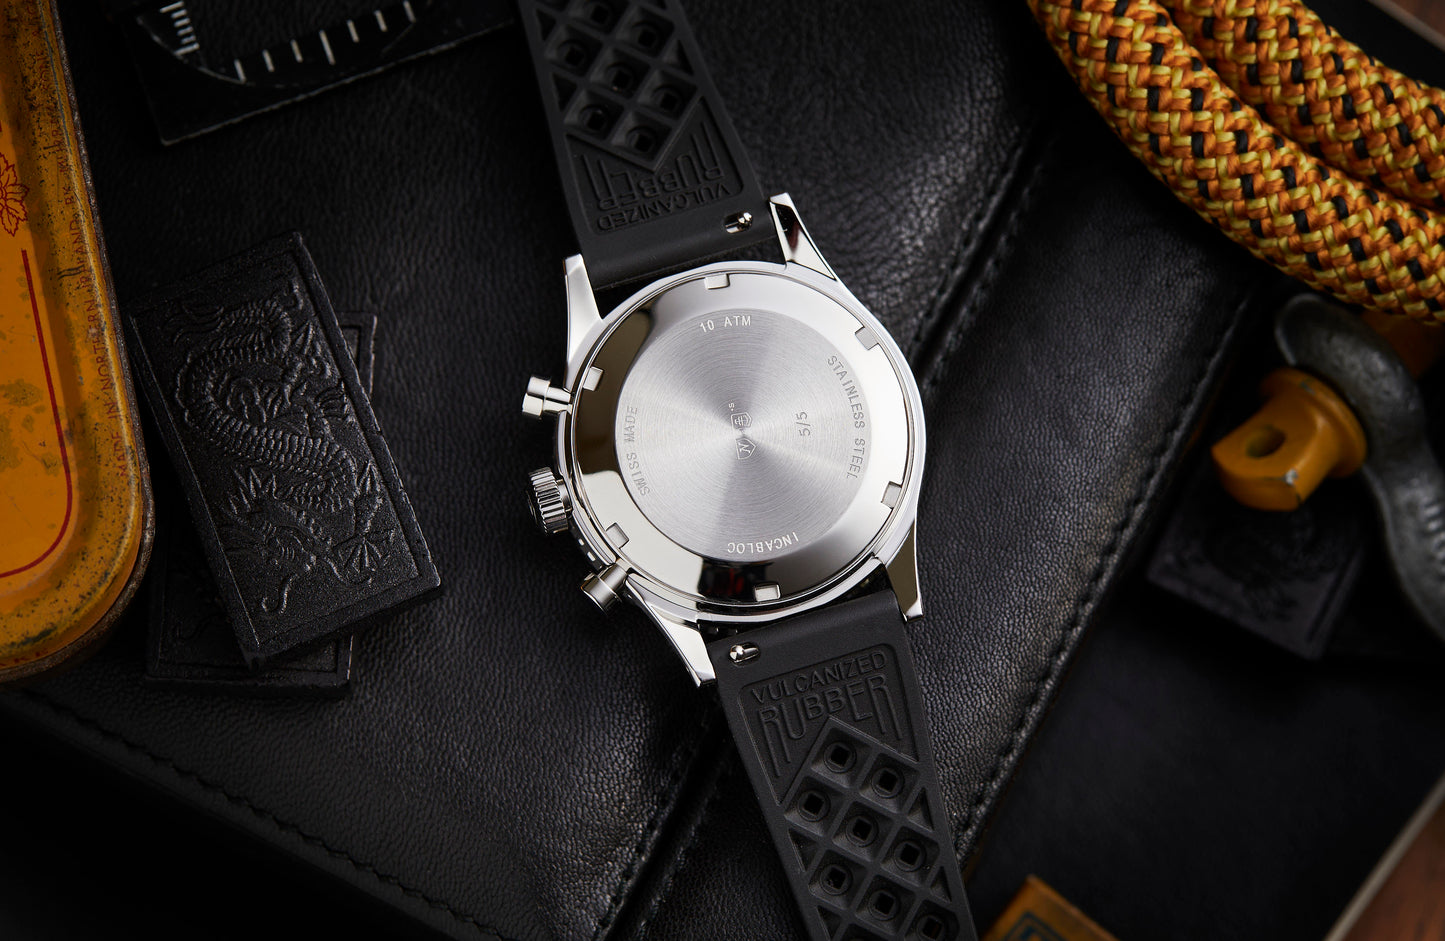 Nivada Grenchen x Time+Tide x seconde/seconde/ ChaosMaster "The Trio" Limited Edition Set